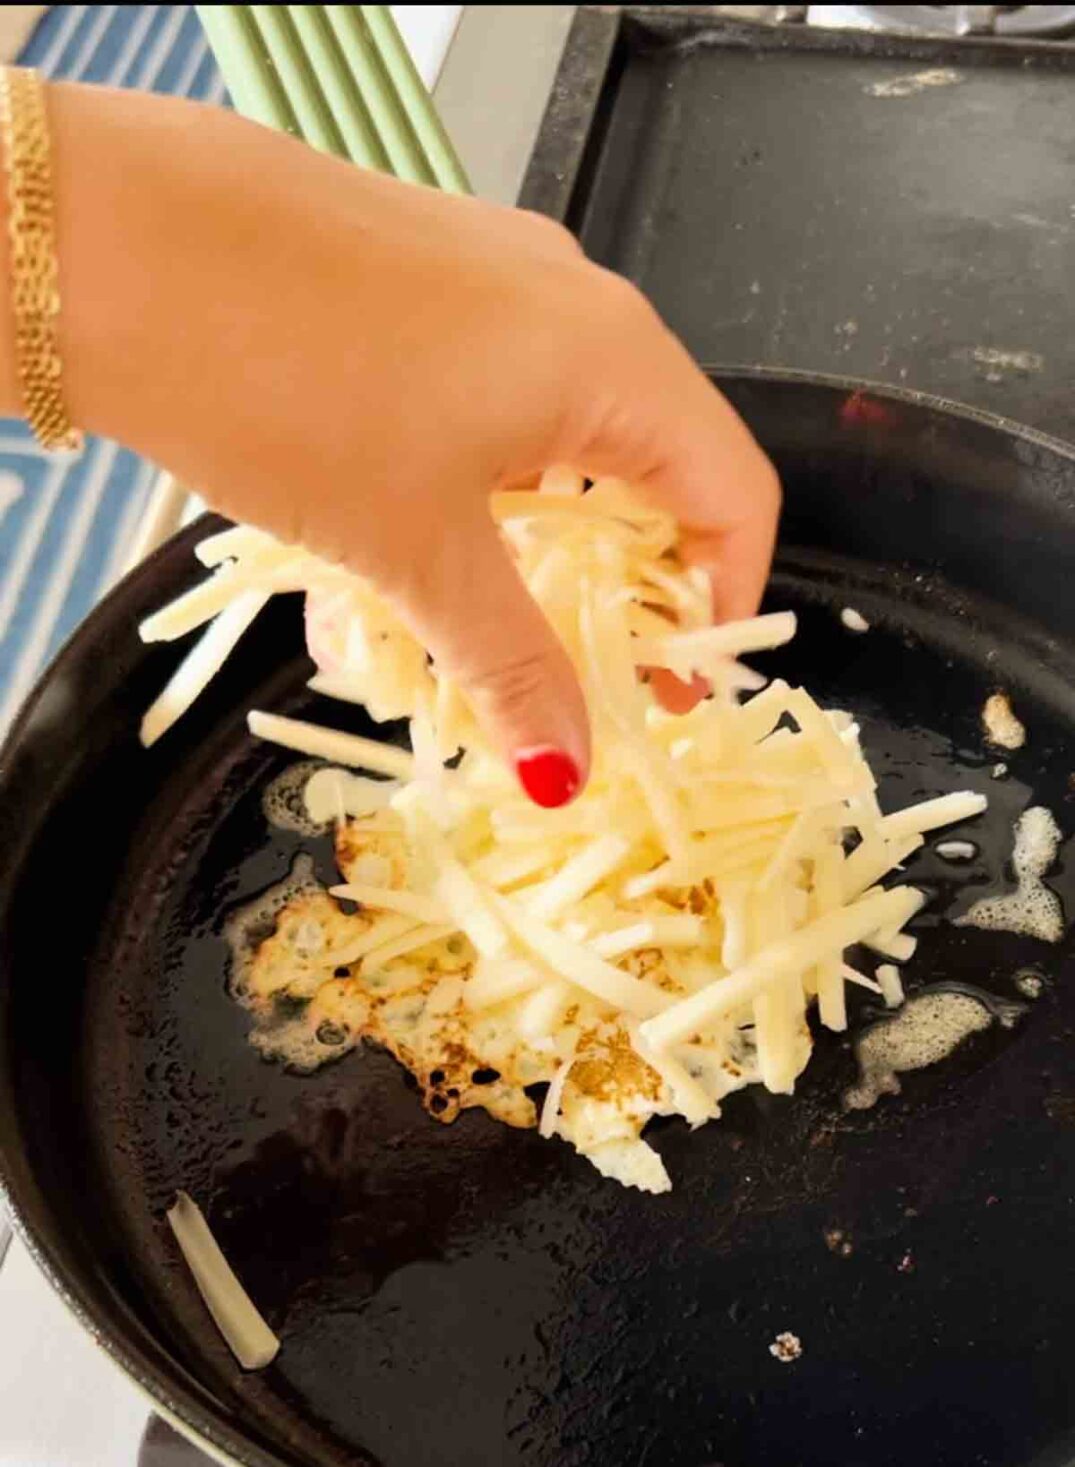 shredded cheese getting put on top of a fried egg.